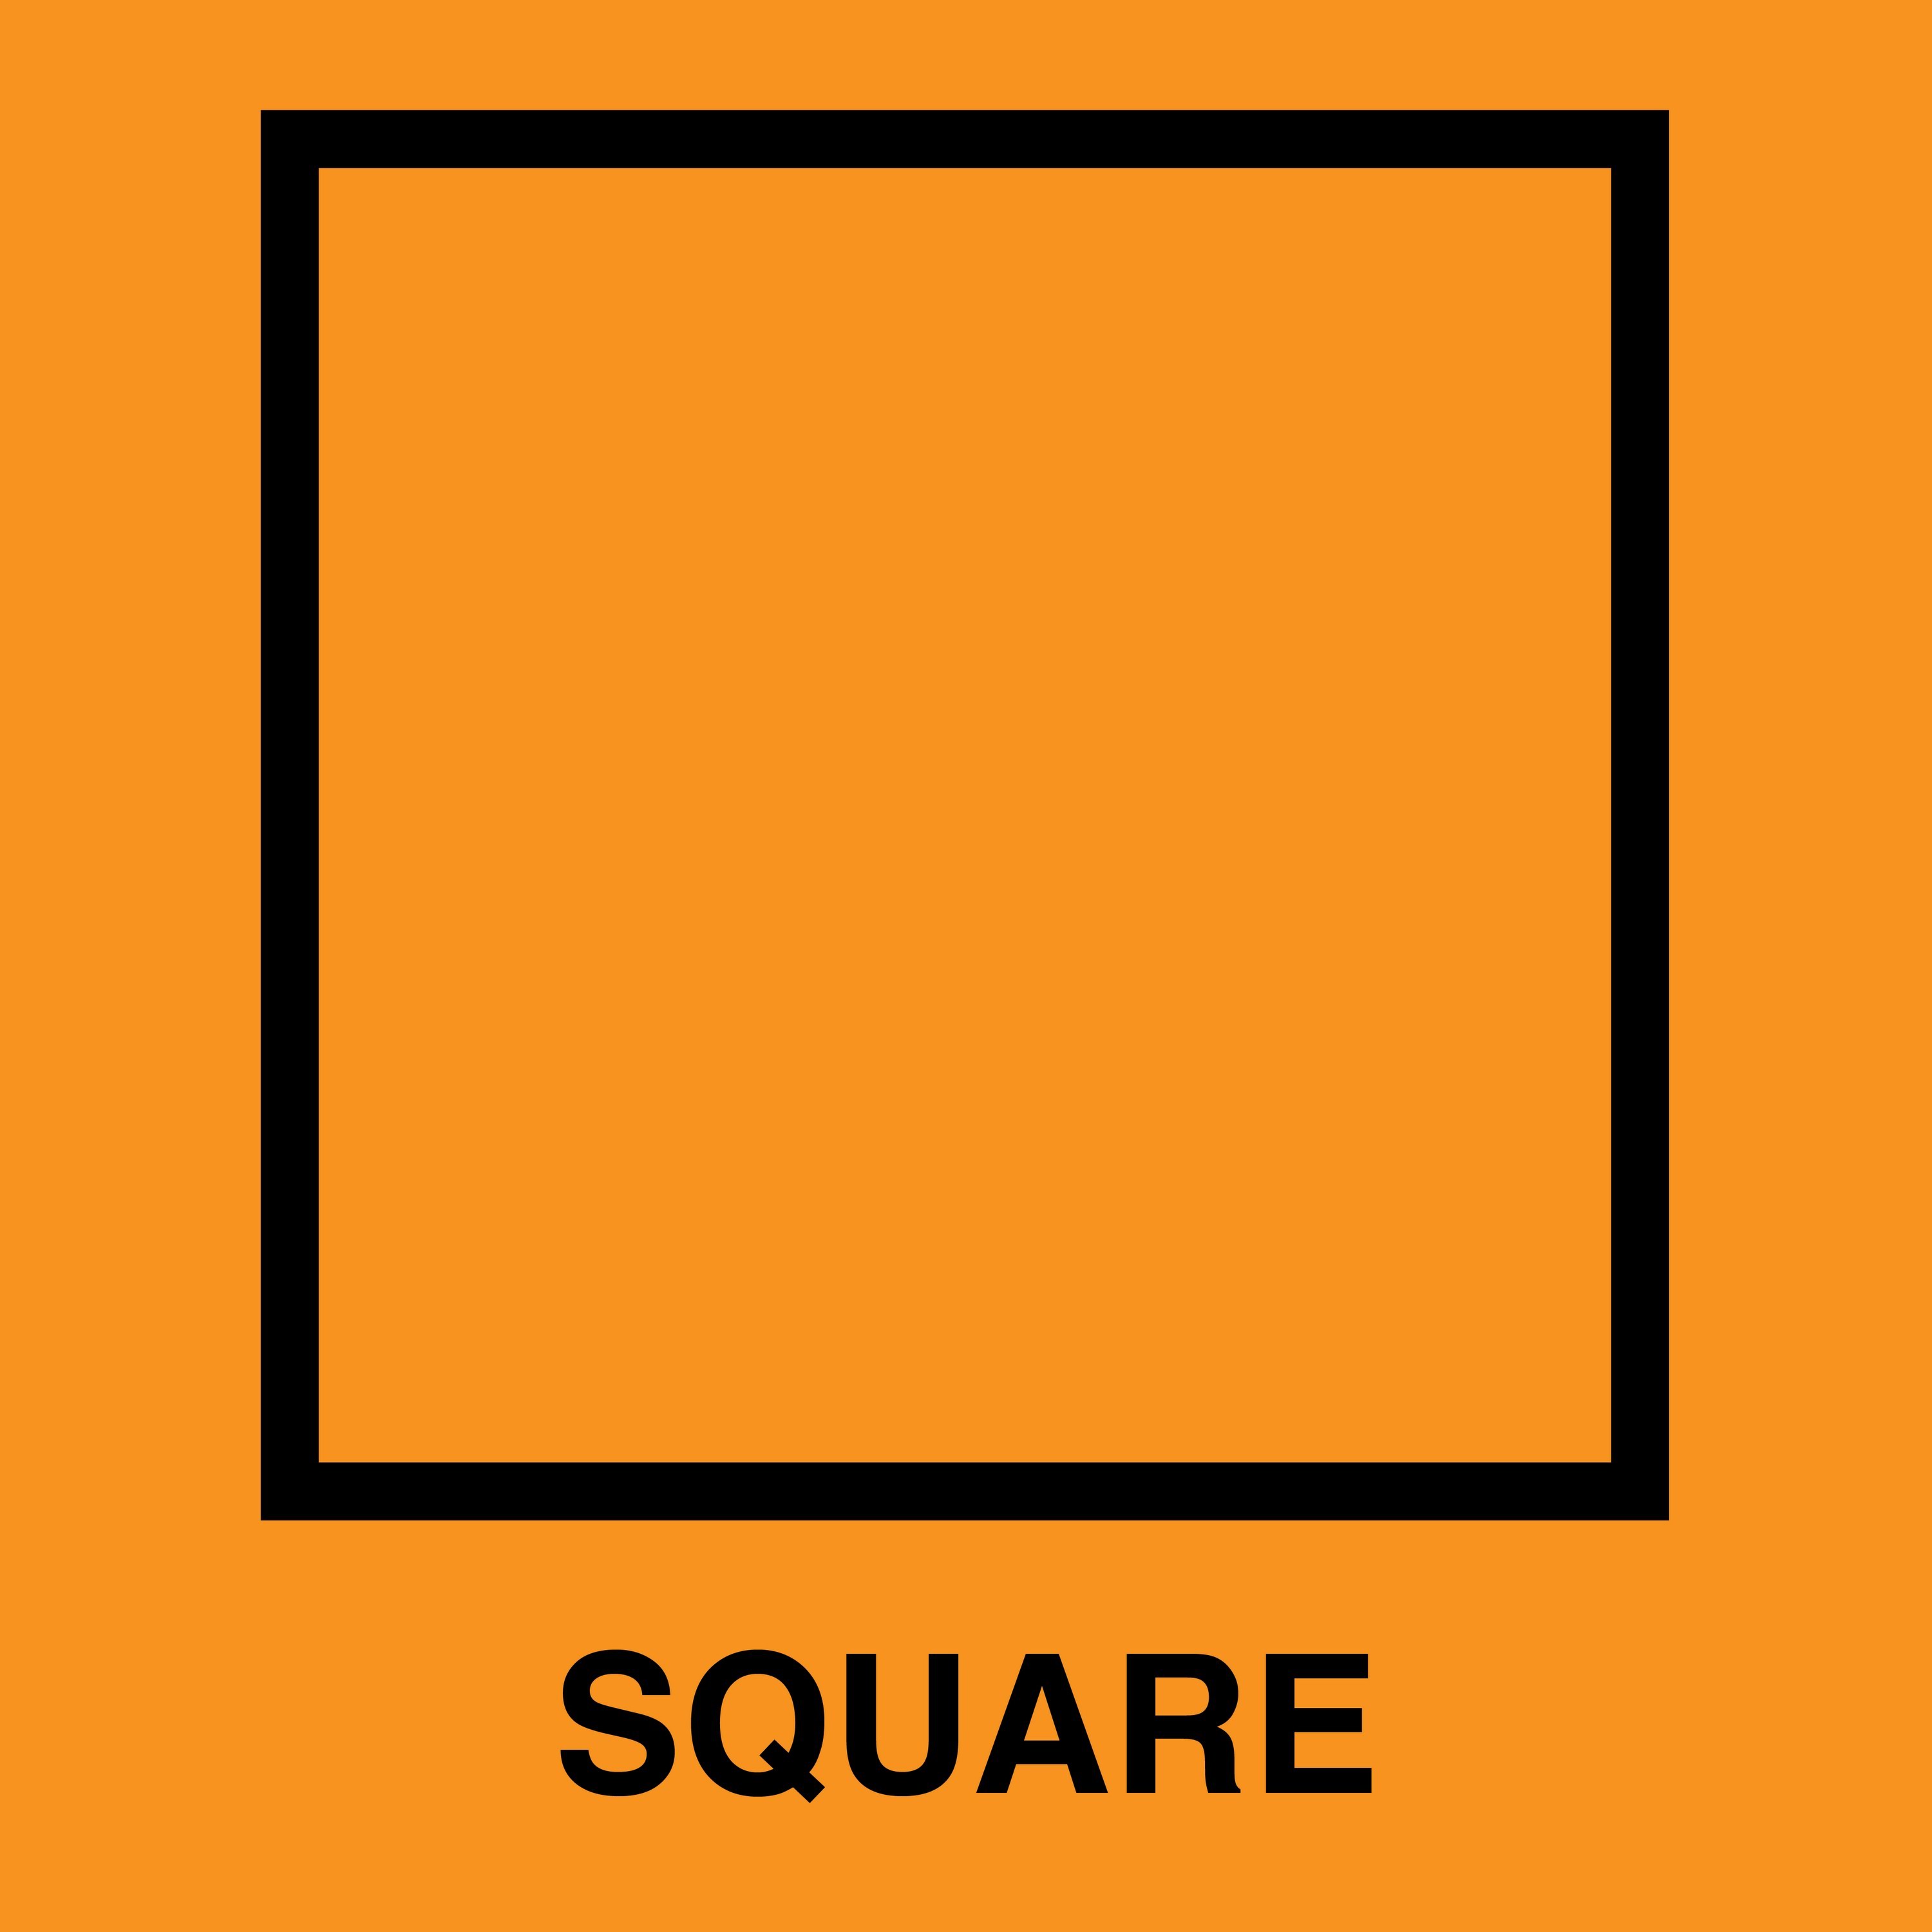 Square Song - YouTube